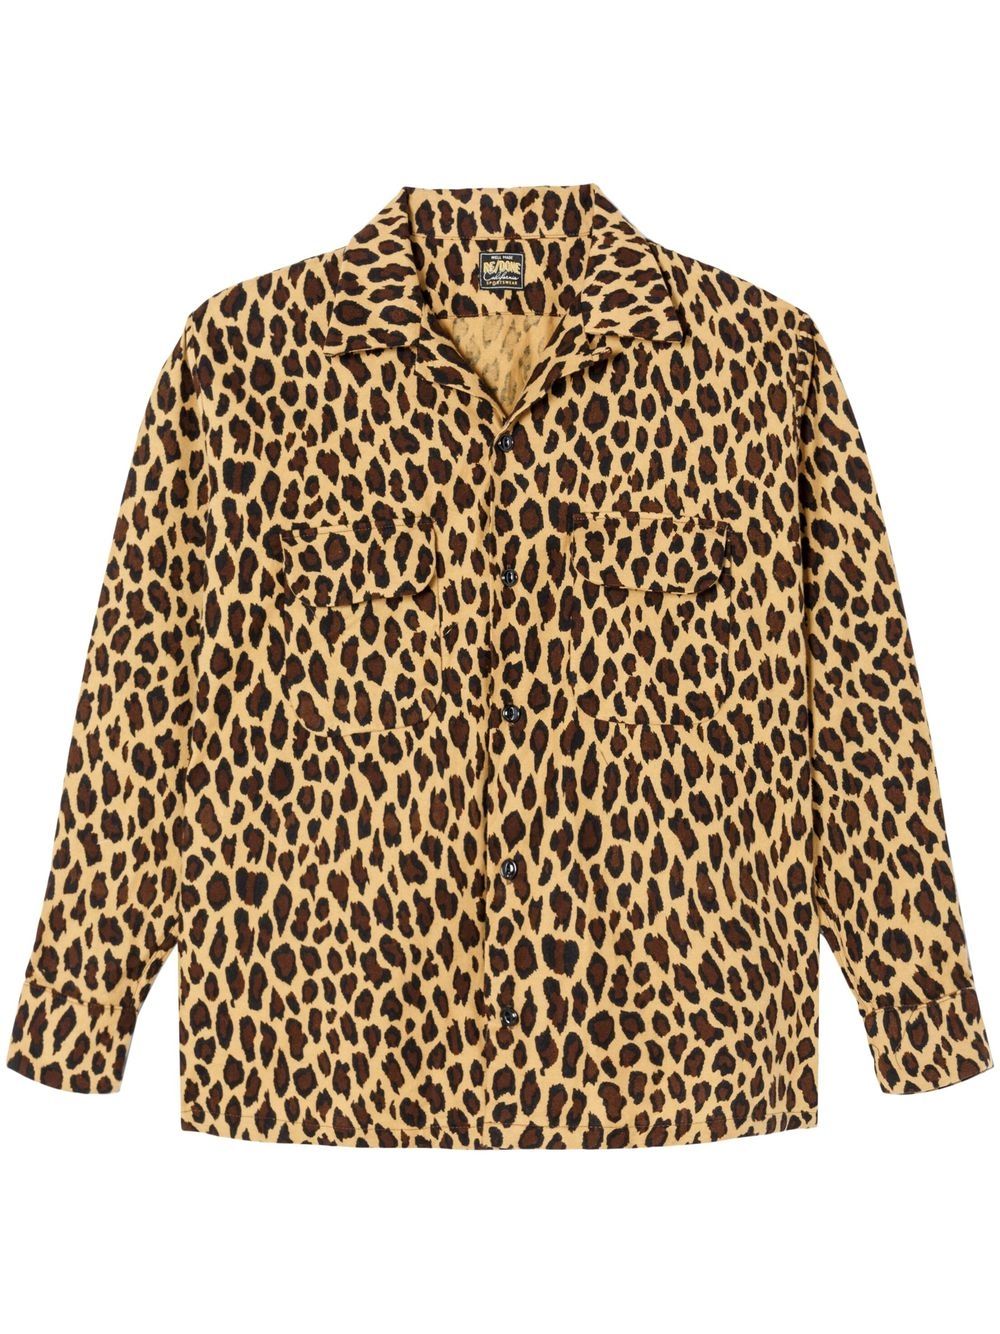 RE/DONE leopard-print long sleeves shirt - Yellow von RE/DONE